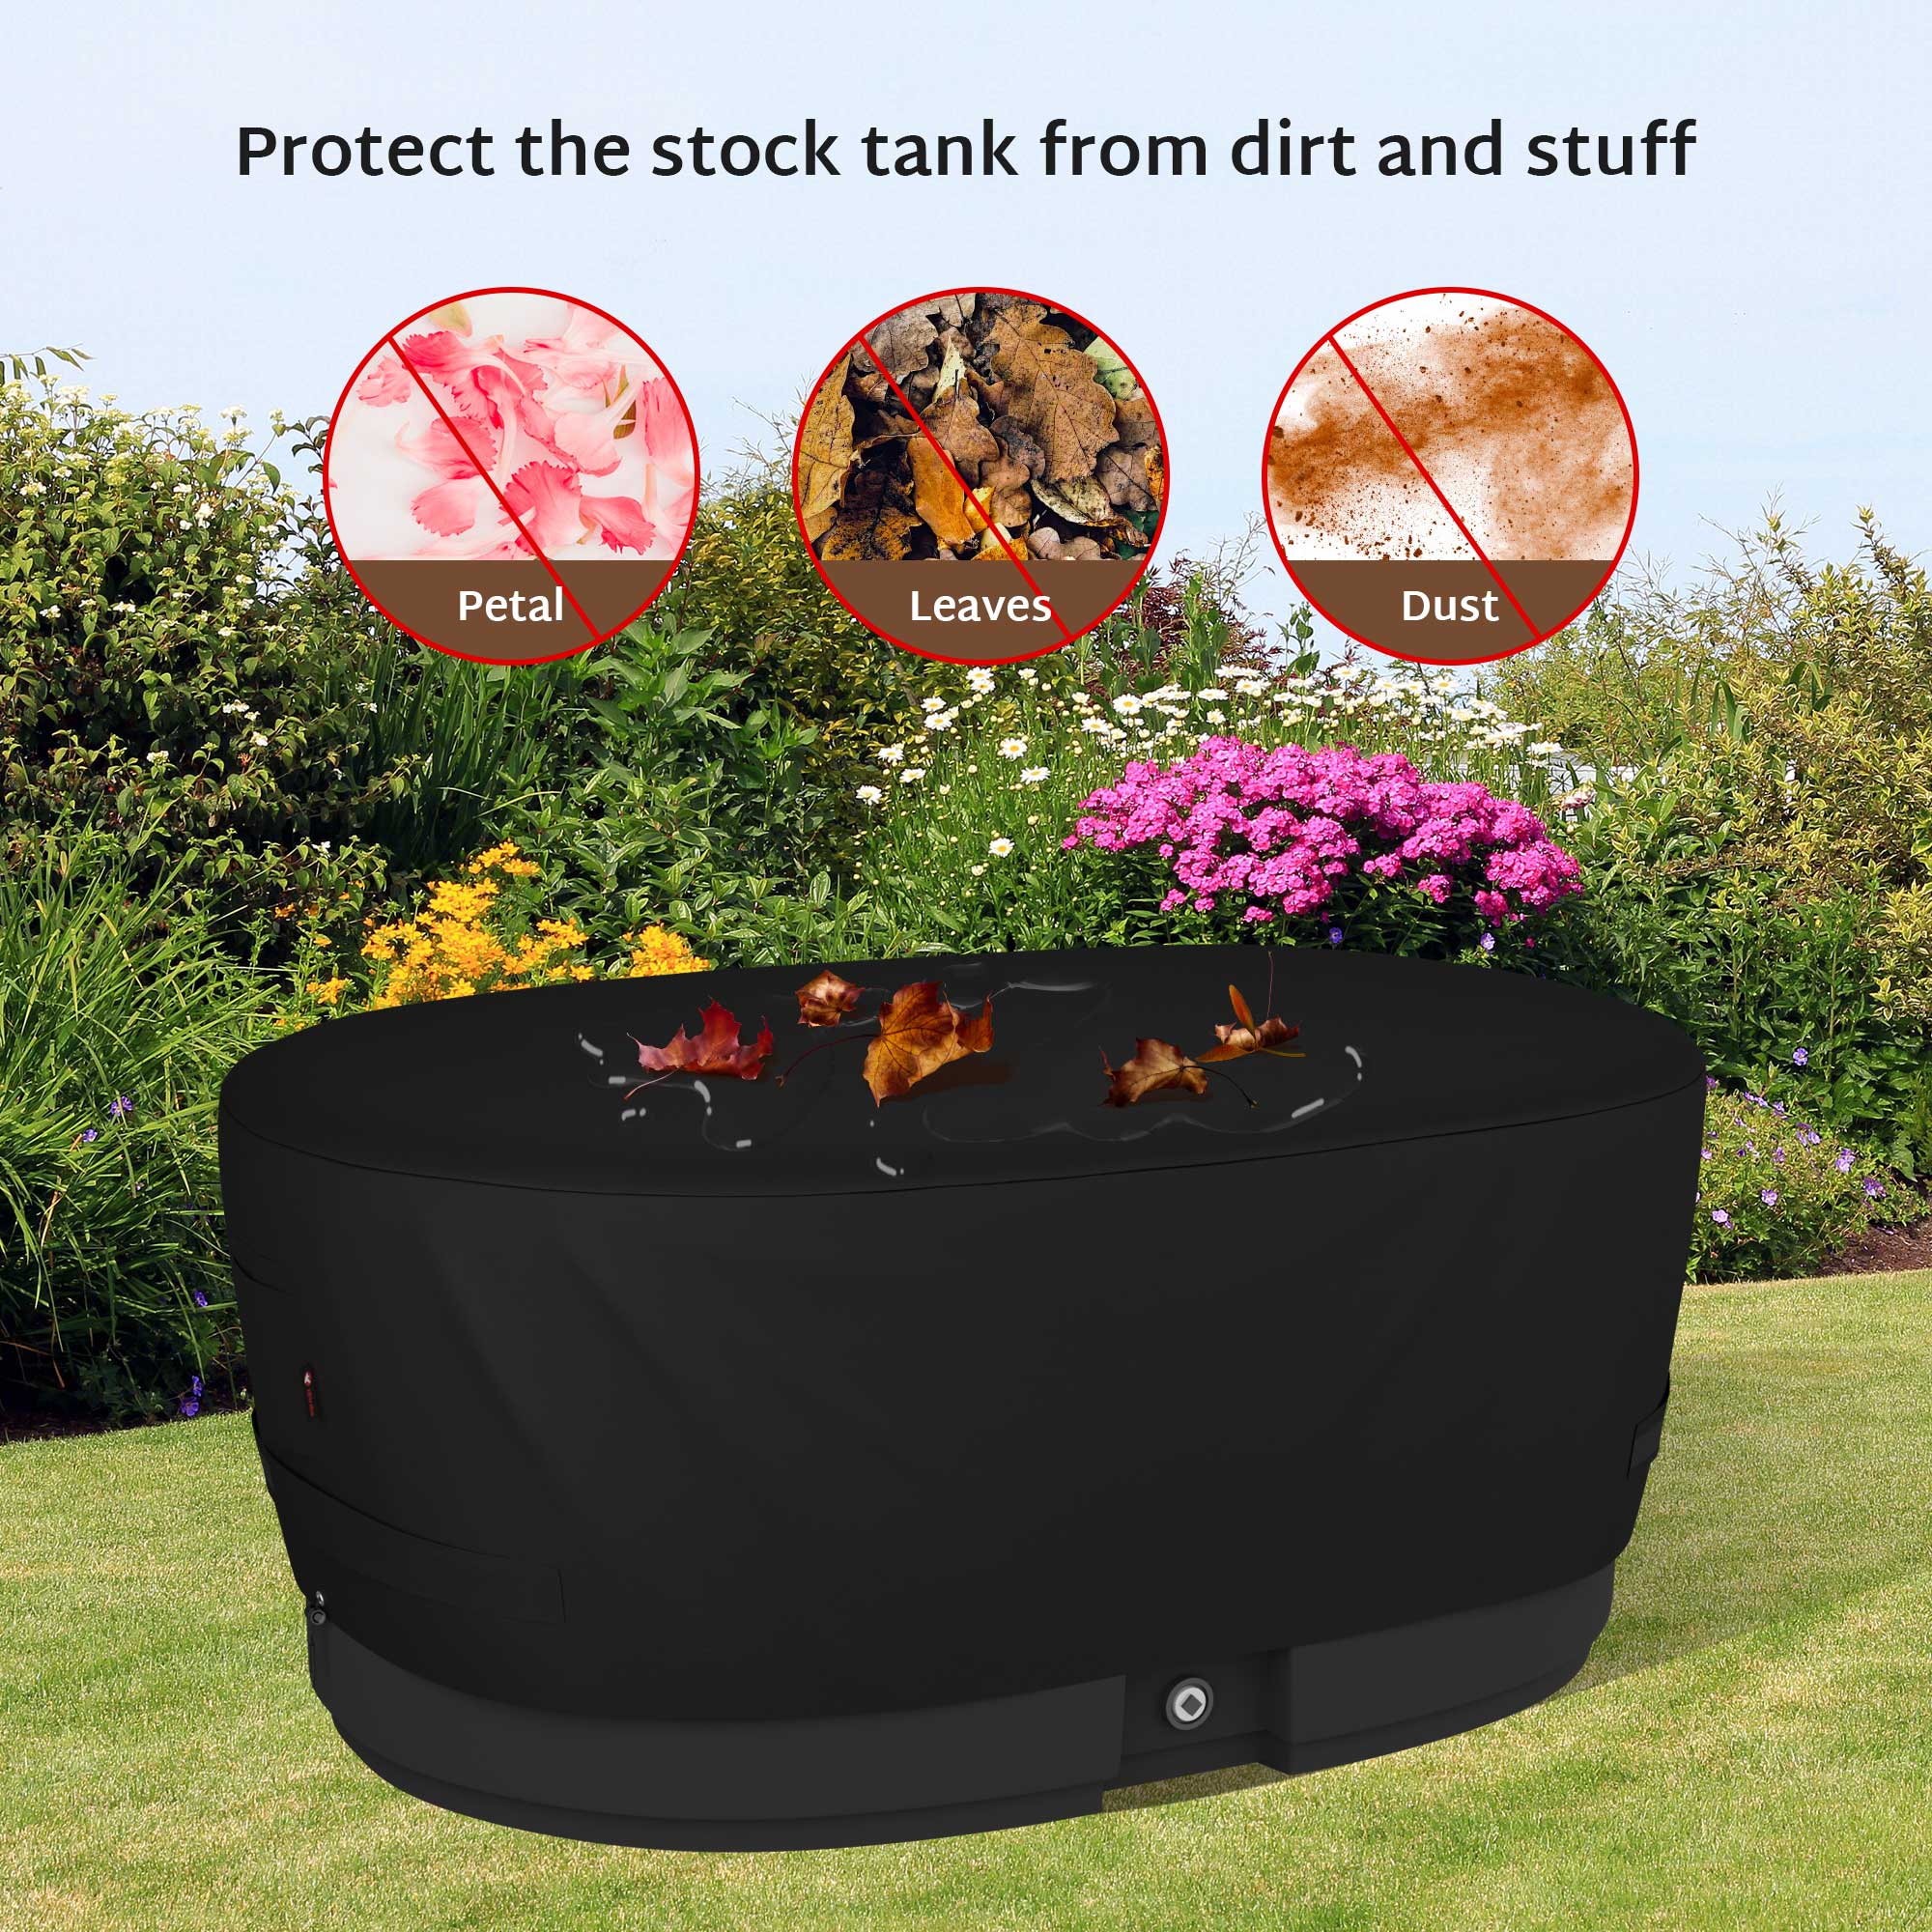 iBirdie Outdoor Waterproof Stock Tank Cover for Ice Bath Cold Plunge Pool - 600D Heavy Duty Weatherproof Oval Tub Covers Compatible for Rubbermaid Water Trough